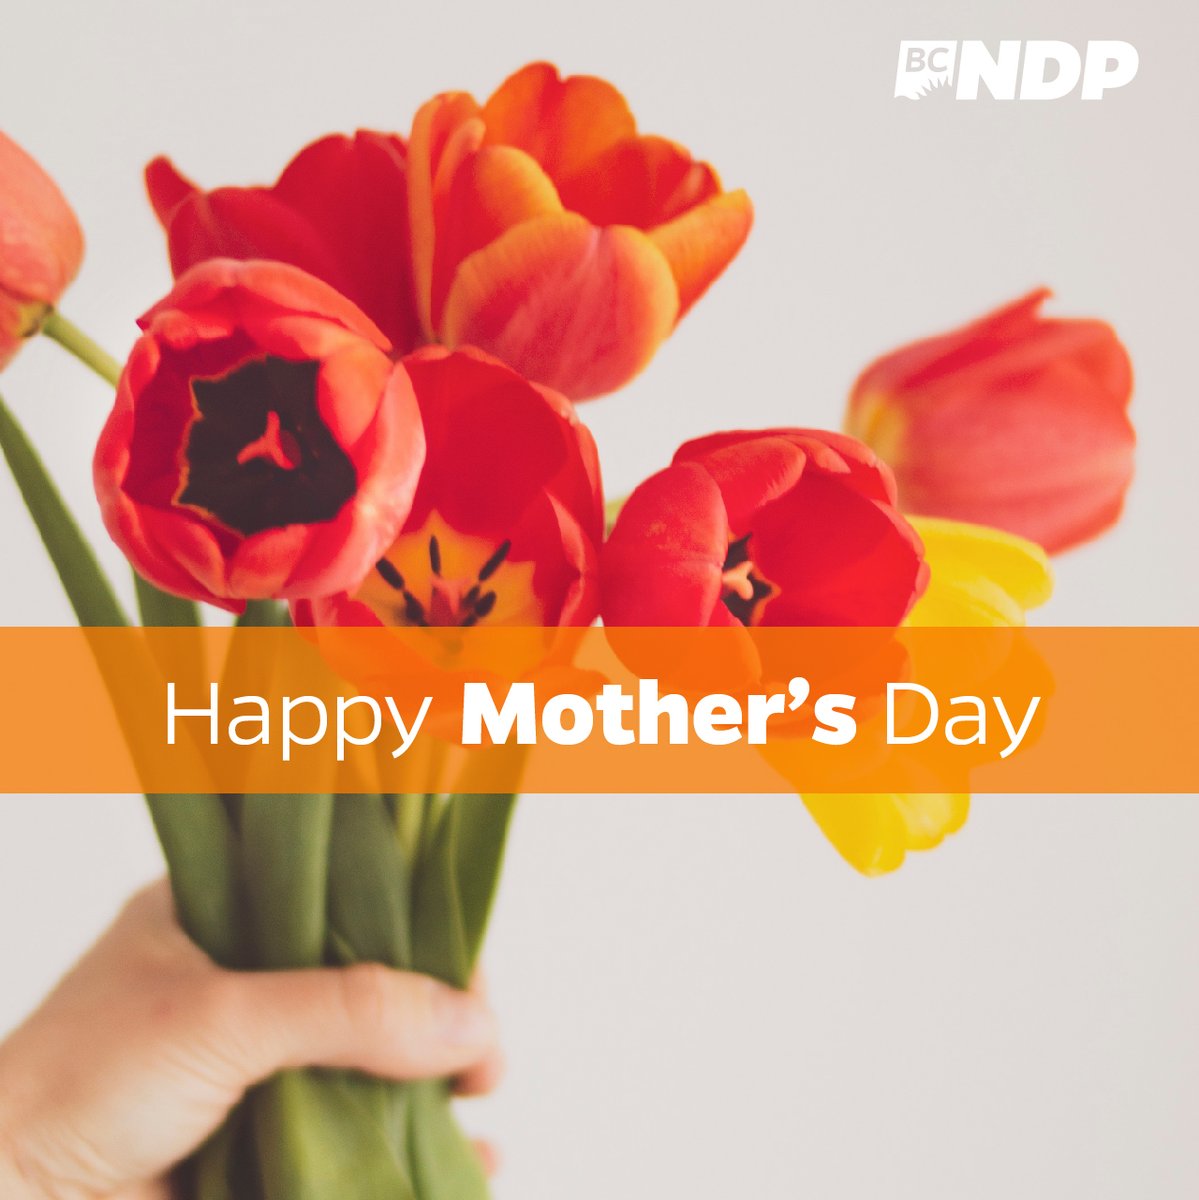 To all the mothers, matriarchs and caregivers doing the most here in BC — Happy Mother's Day. And to those who don't mark this day with celebration: we see you, too. ❤️ 🧡 💛